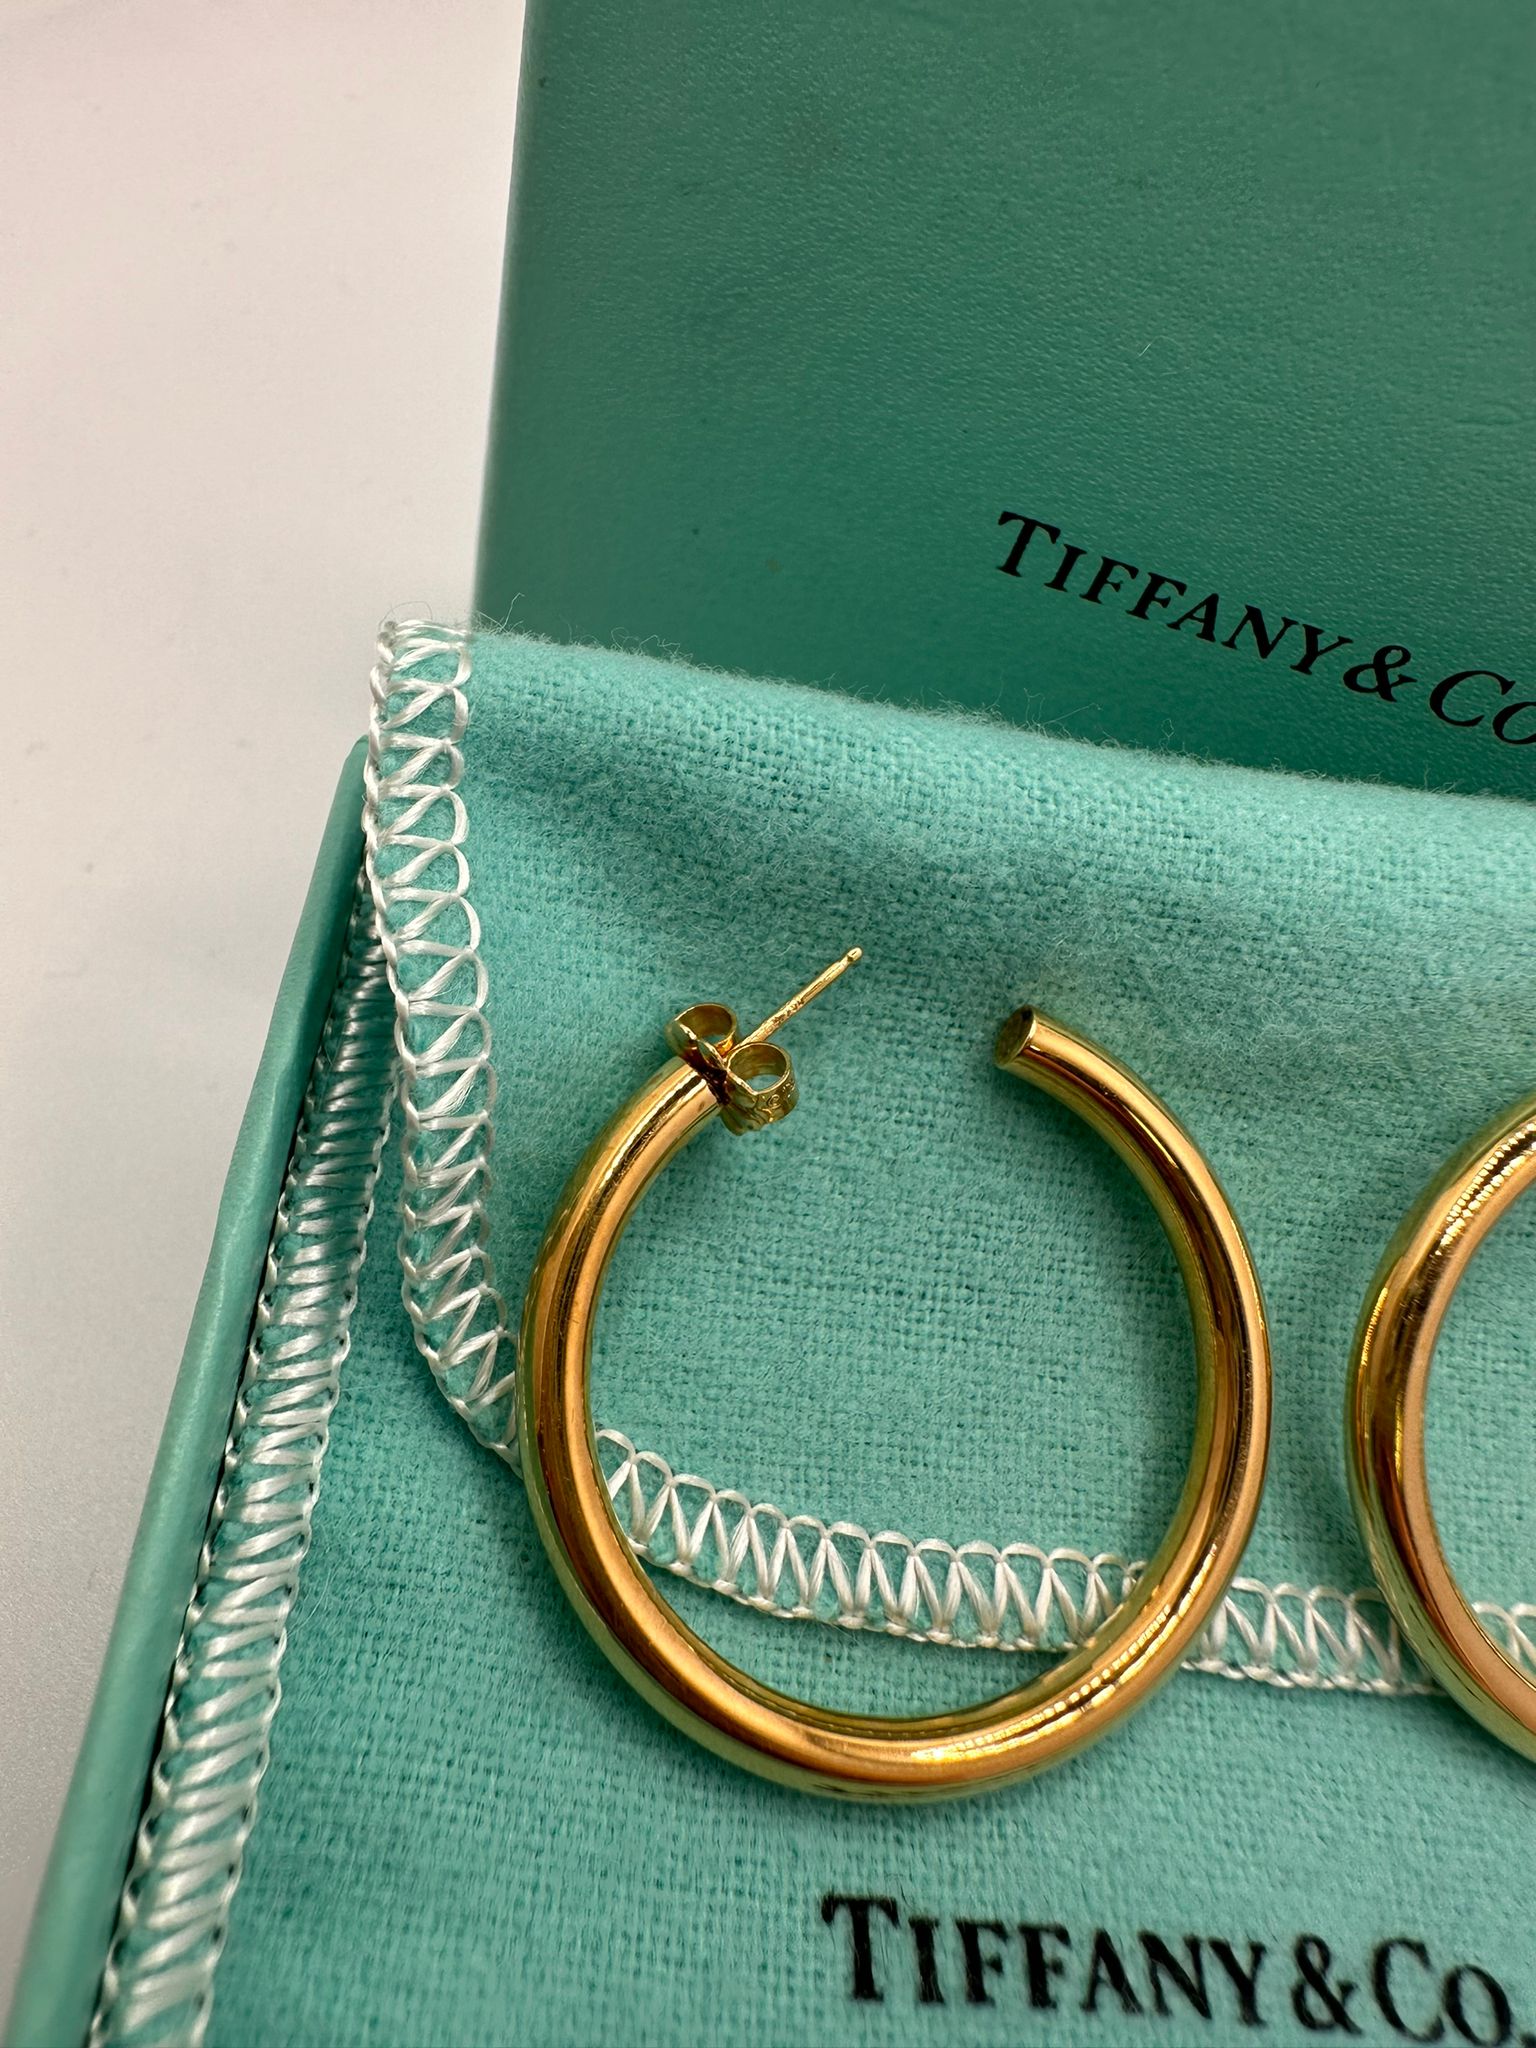 18ct gold Tiffany & Co earrings - Image 3 of 4